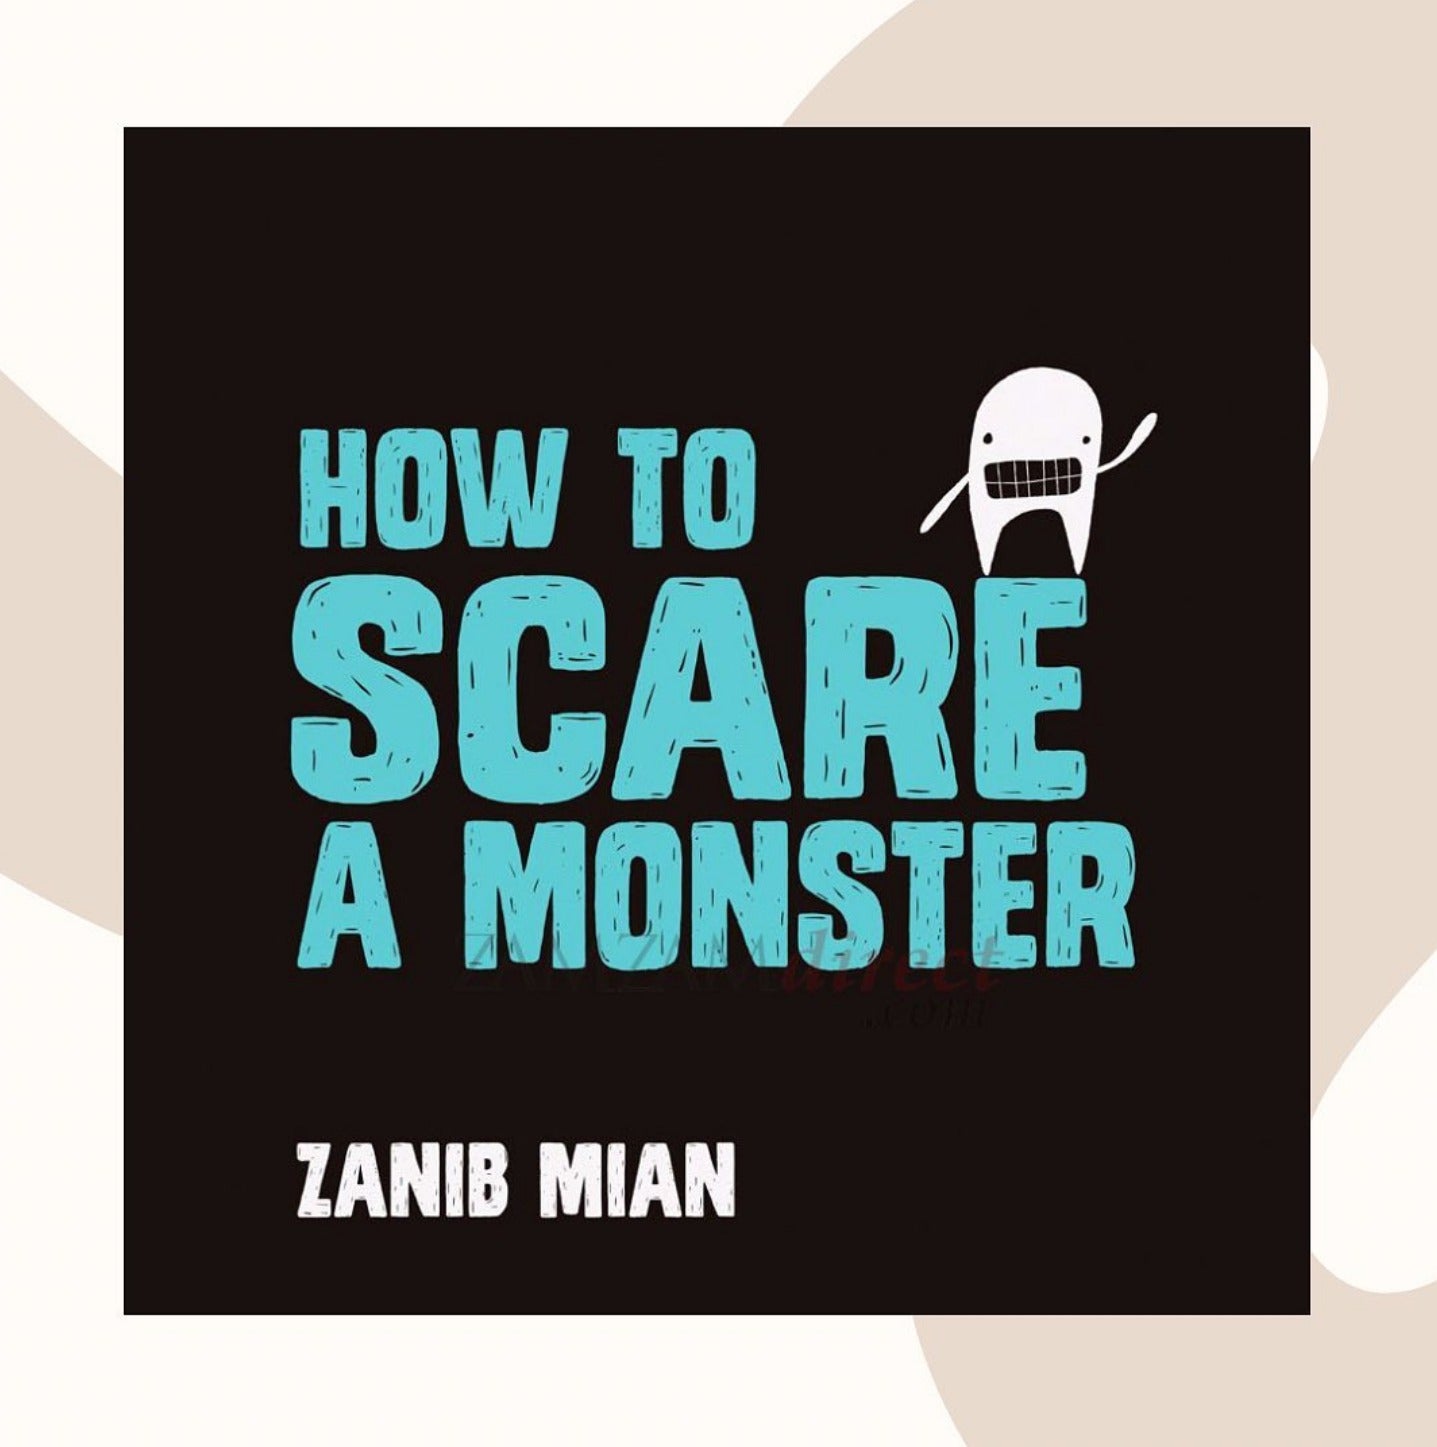 How to scare a Monster